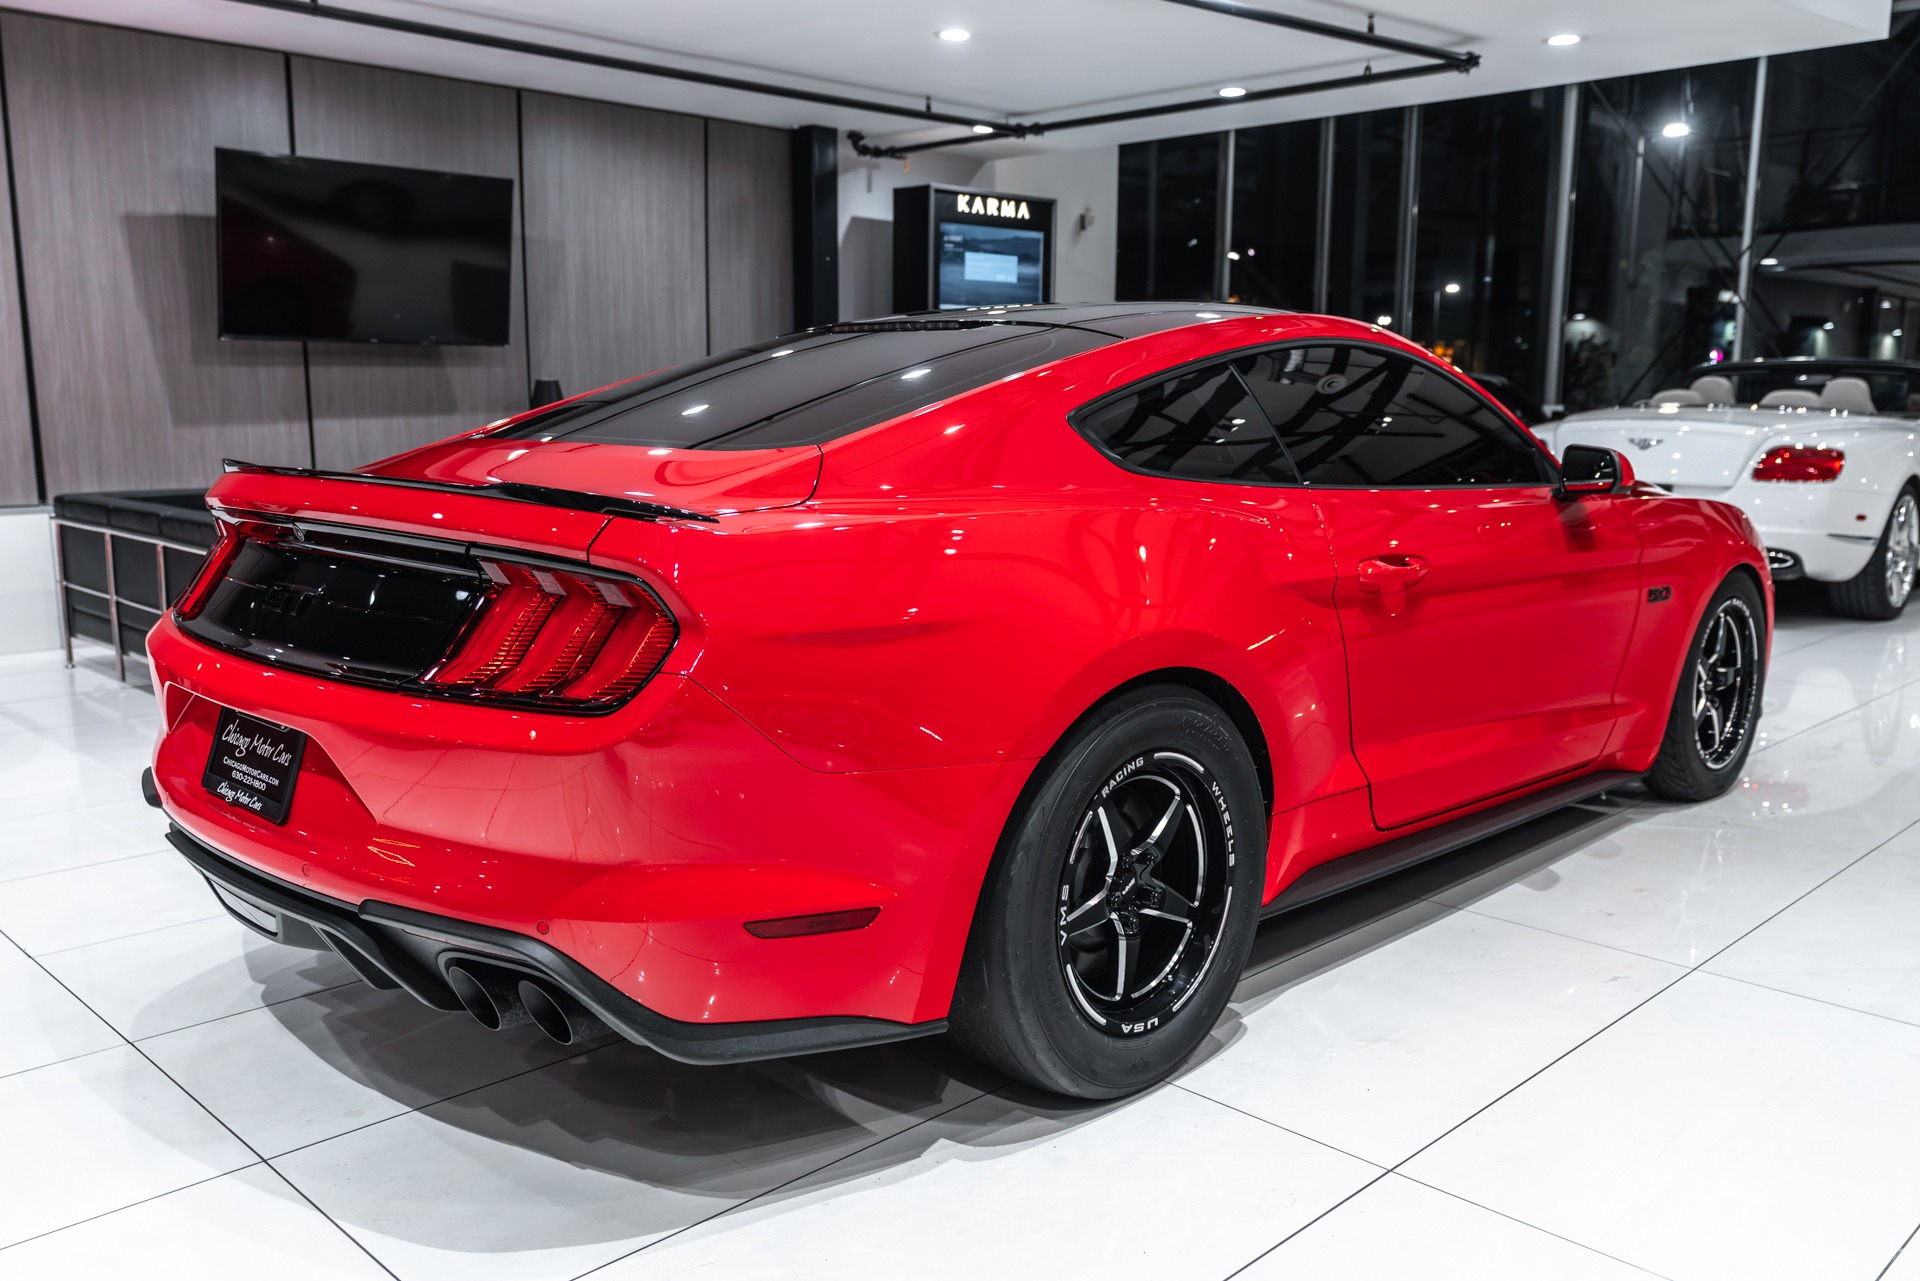 Used-2018-Ford-Mustang-GT-Coupe-Twin-Turbo-L-M-Racing-Engine-6466-Turbos-ONLY-6k-Miles-10-Spd